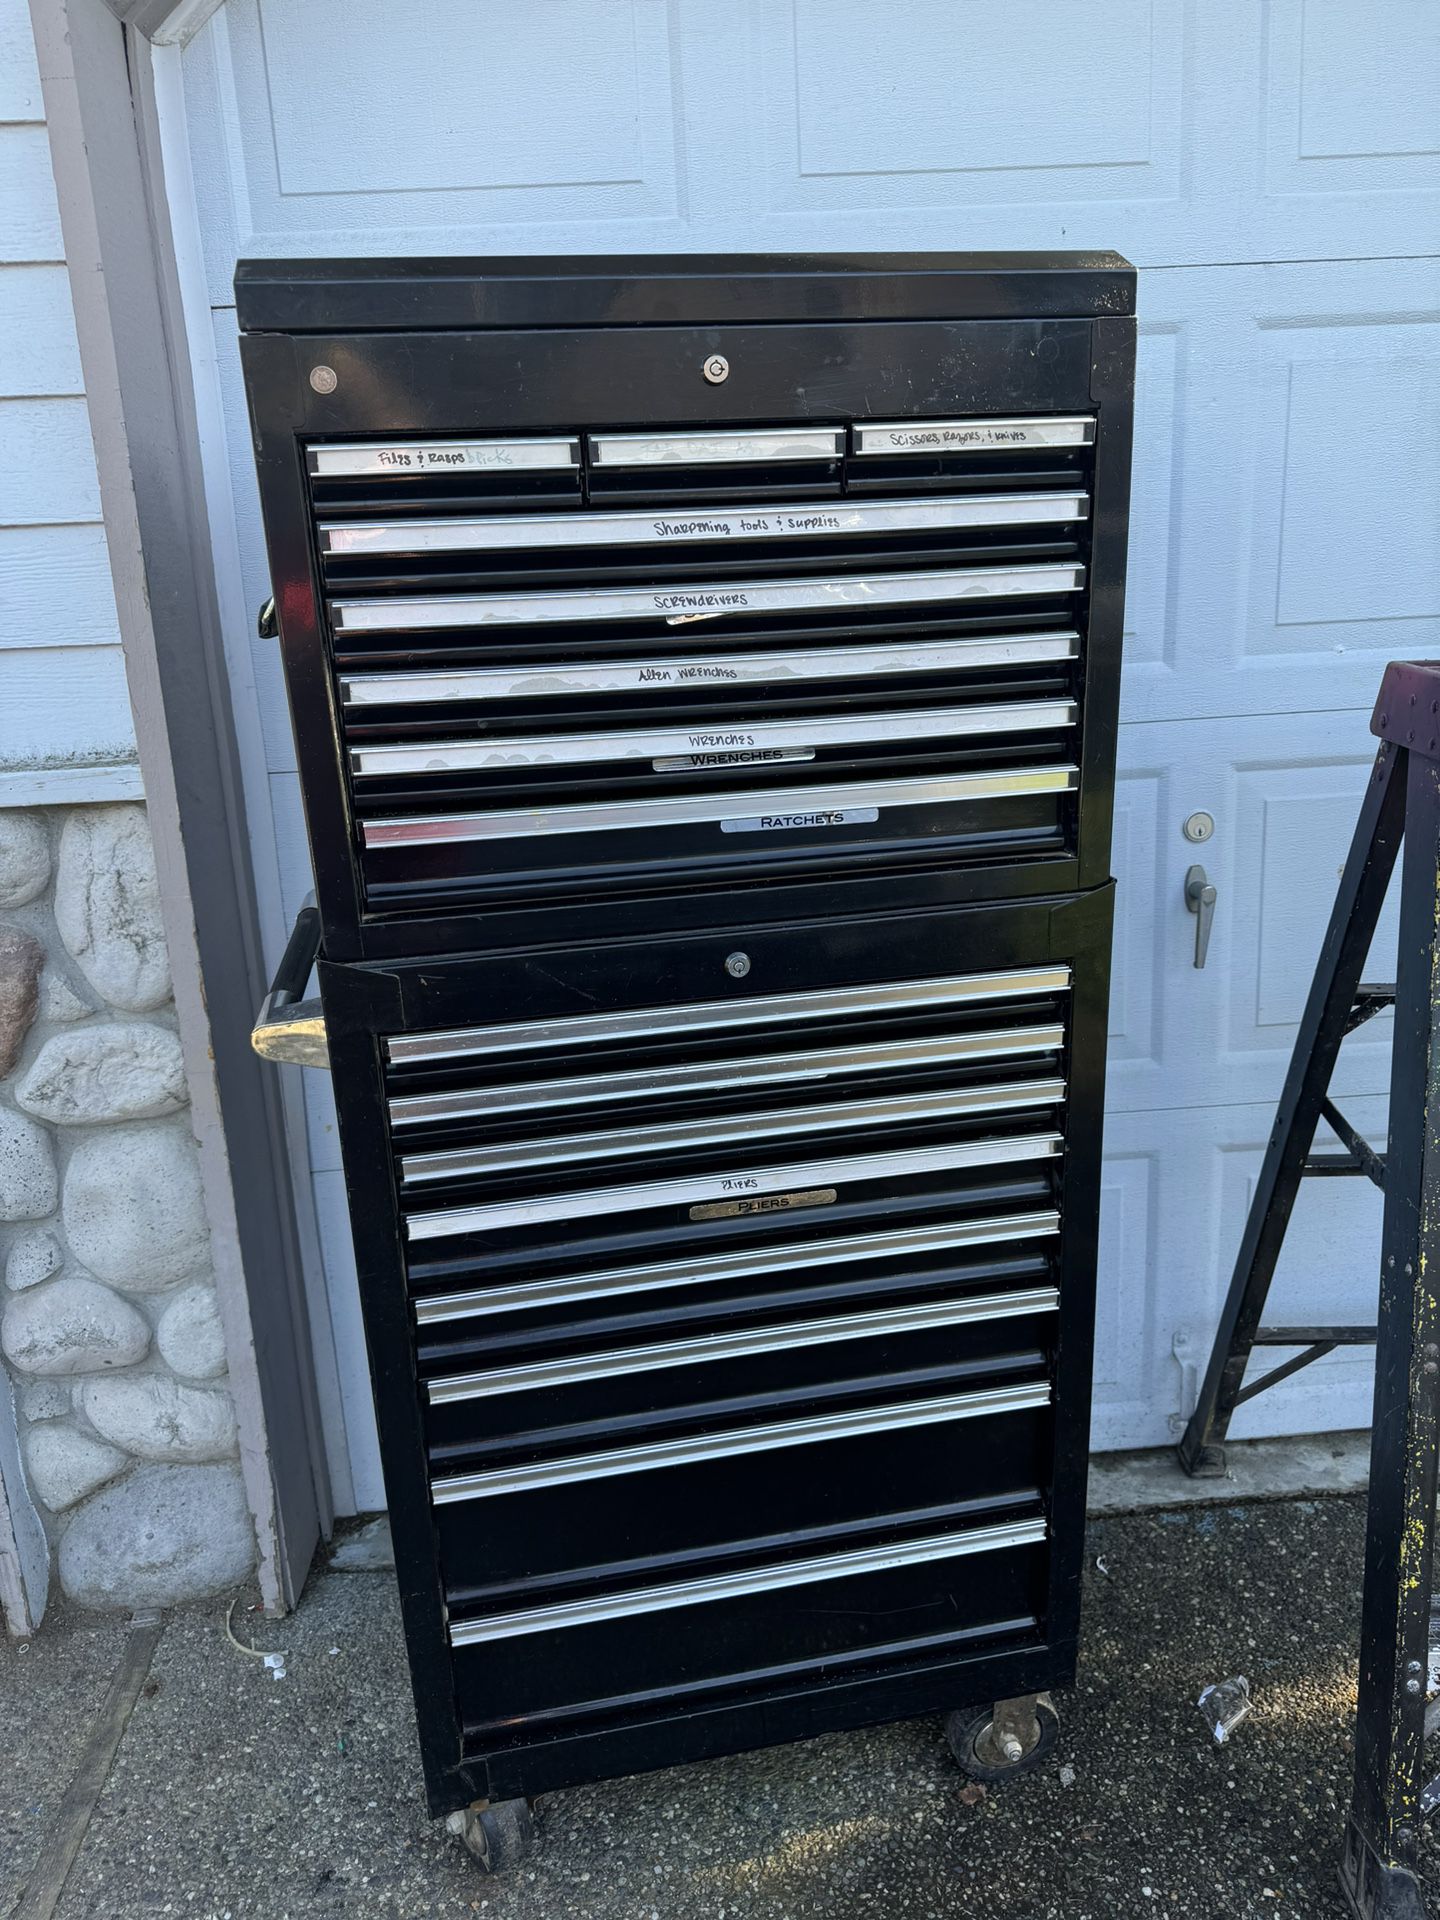 US General Tool Chest on wheels and top chest 22” x 27”